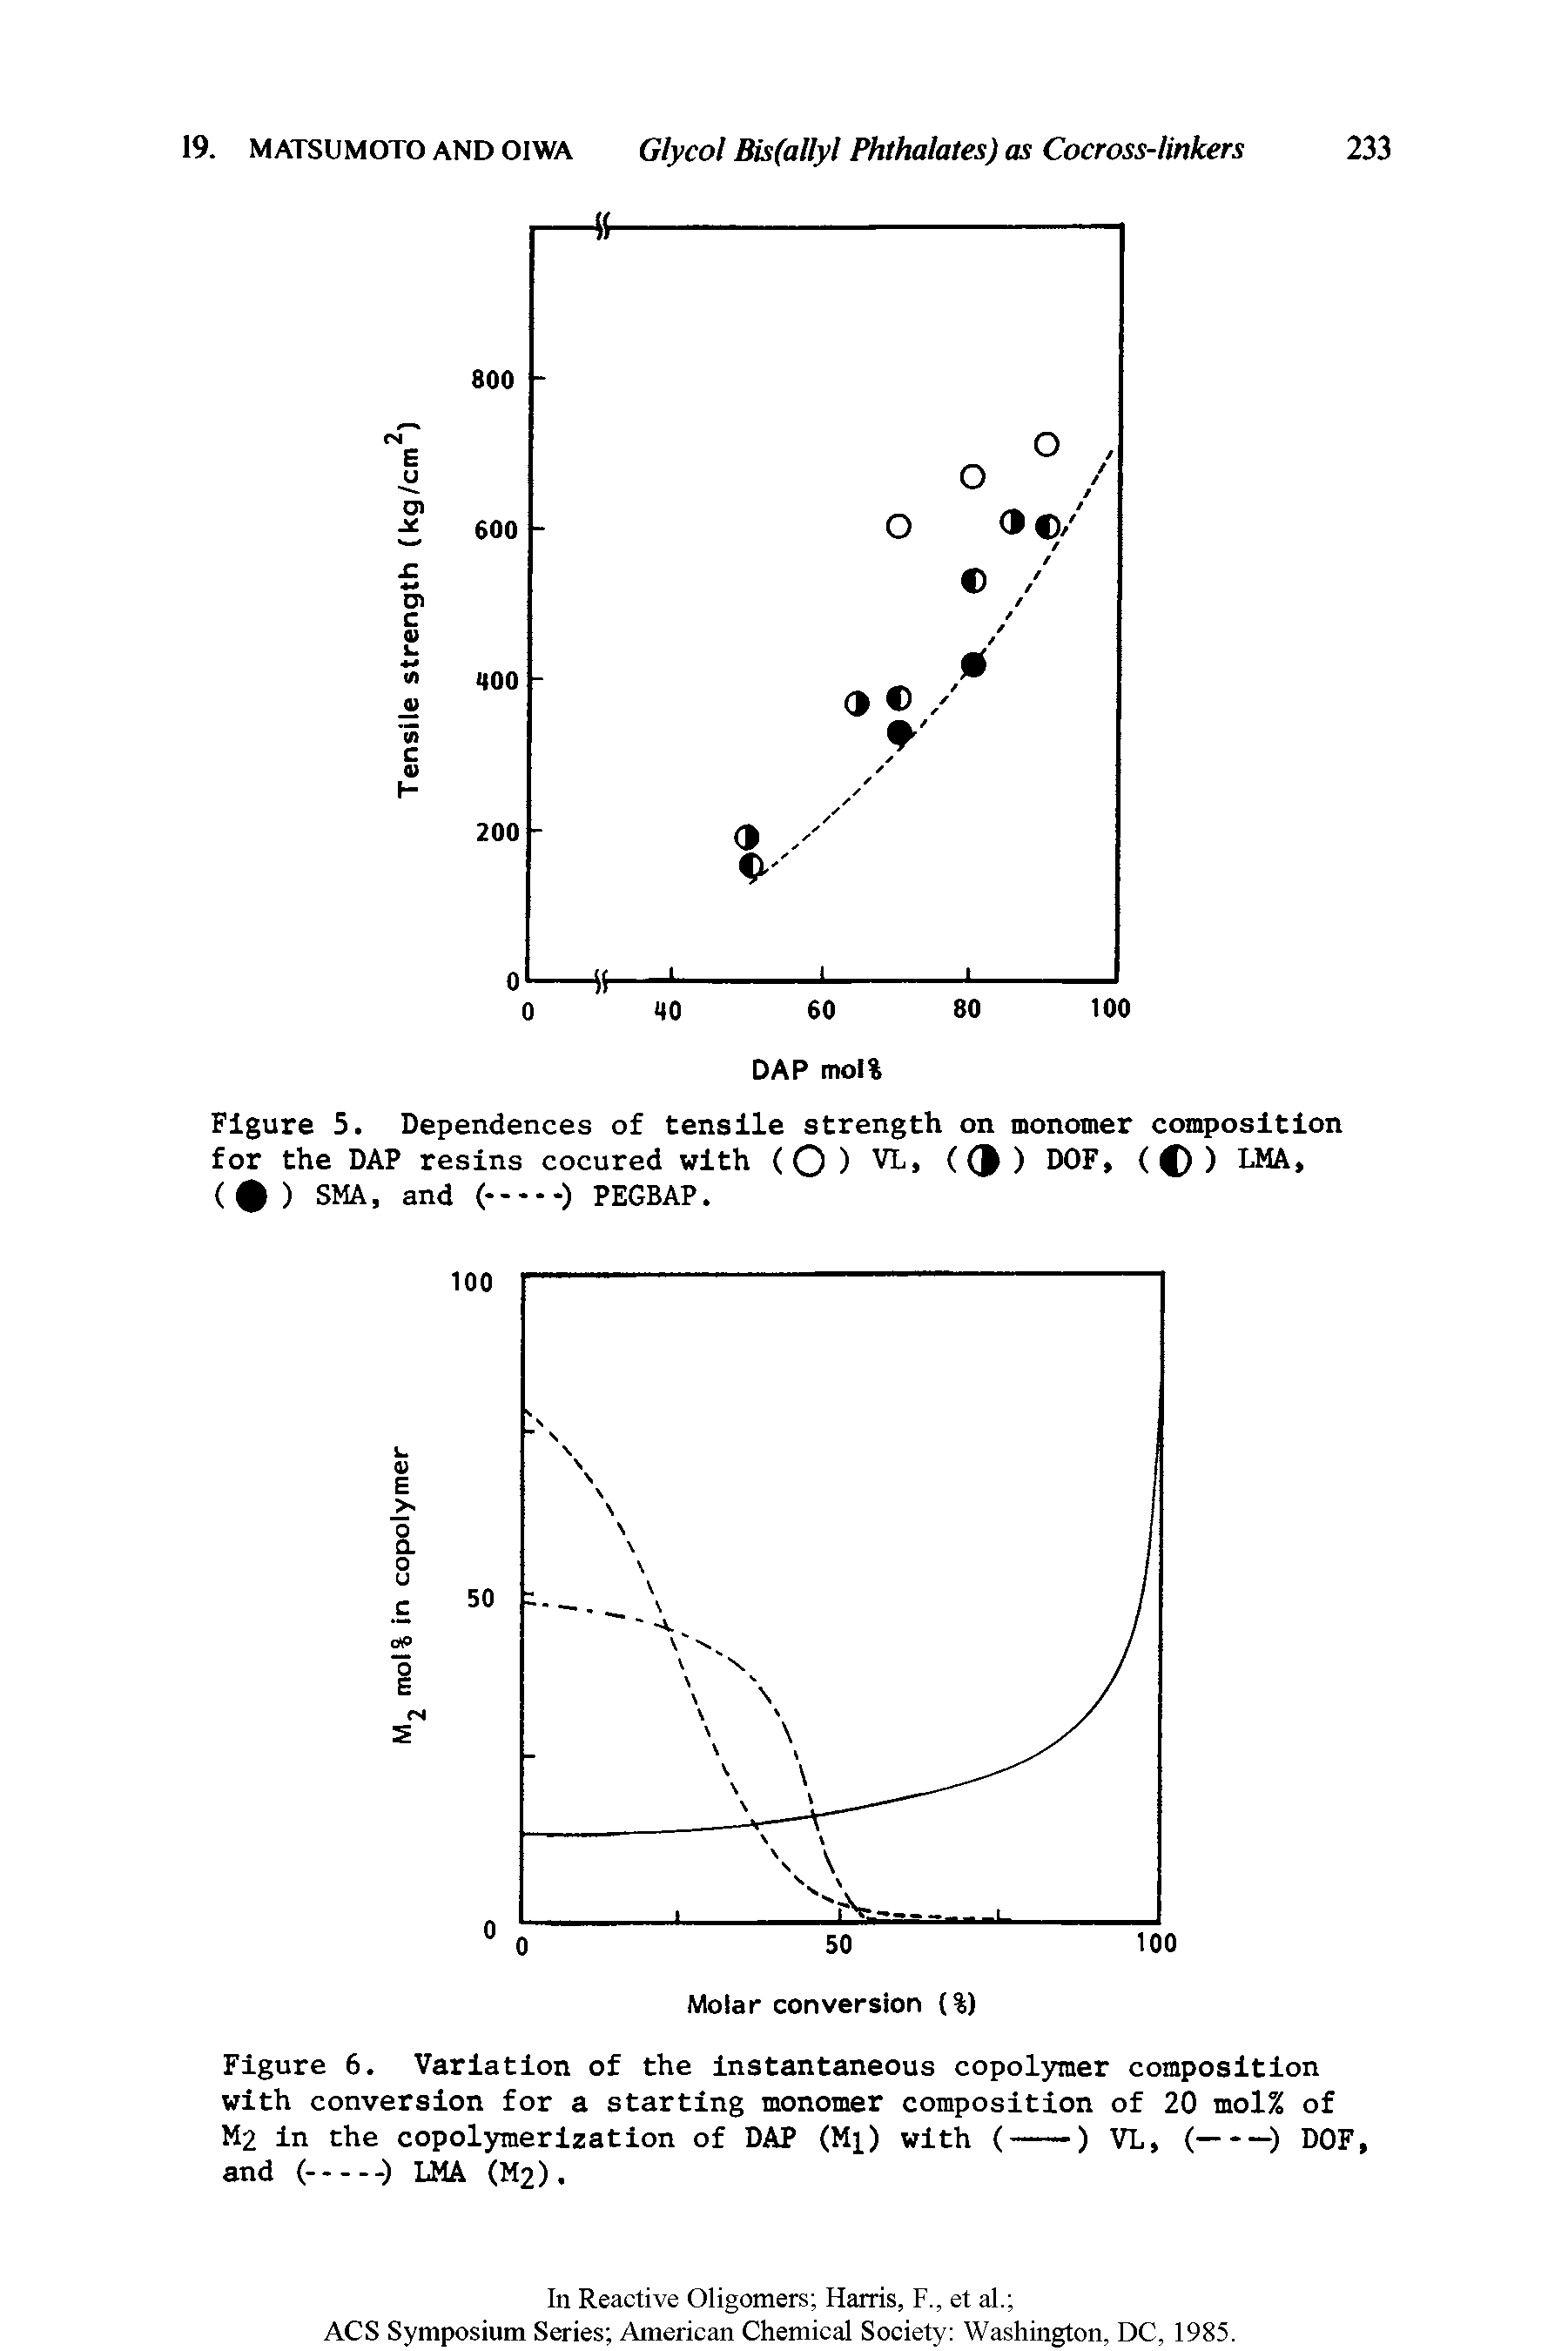 Figure 6. Variation of the instantaneous copolymer composition with conversion for a starting monomer composition of 20 mol% of...